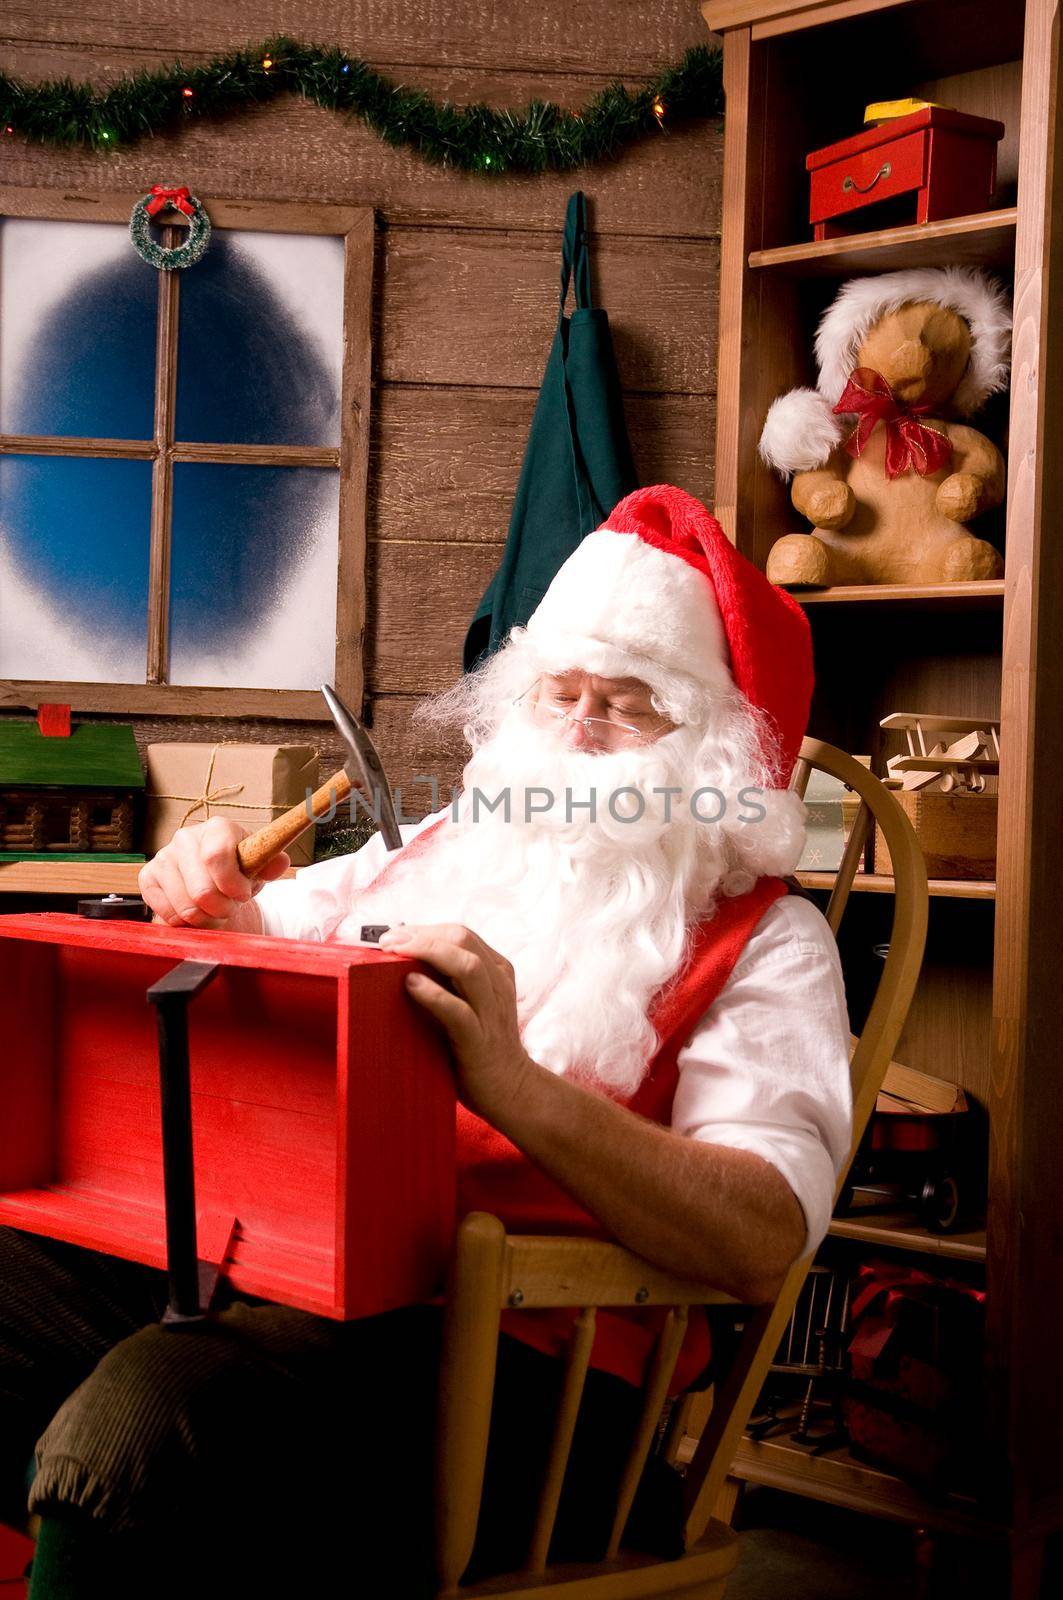 Santa Claus sitting in Rocking Chair in Workshop With Red wooden Wagon on his Lap, Vertical Composition